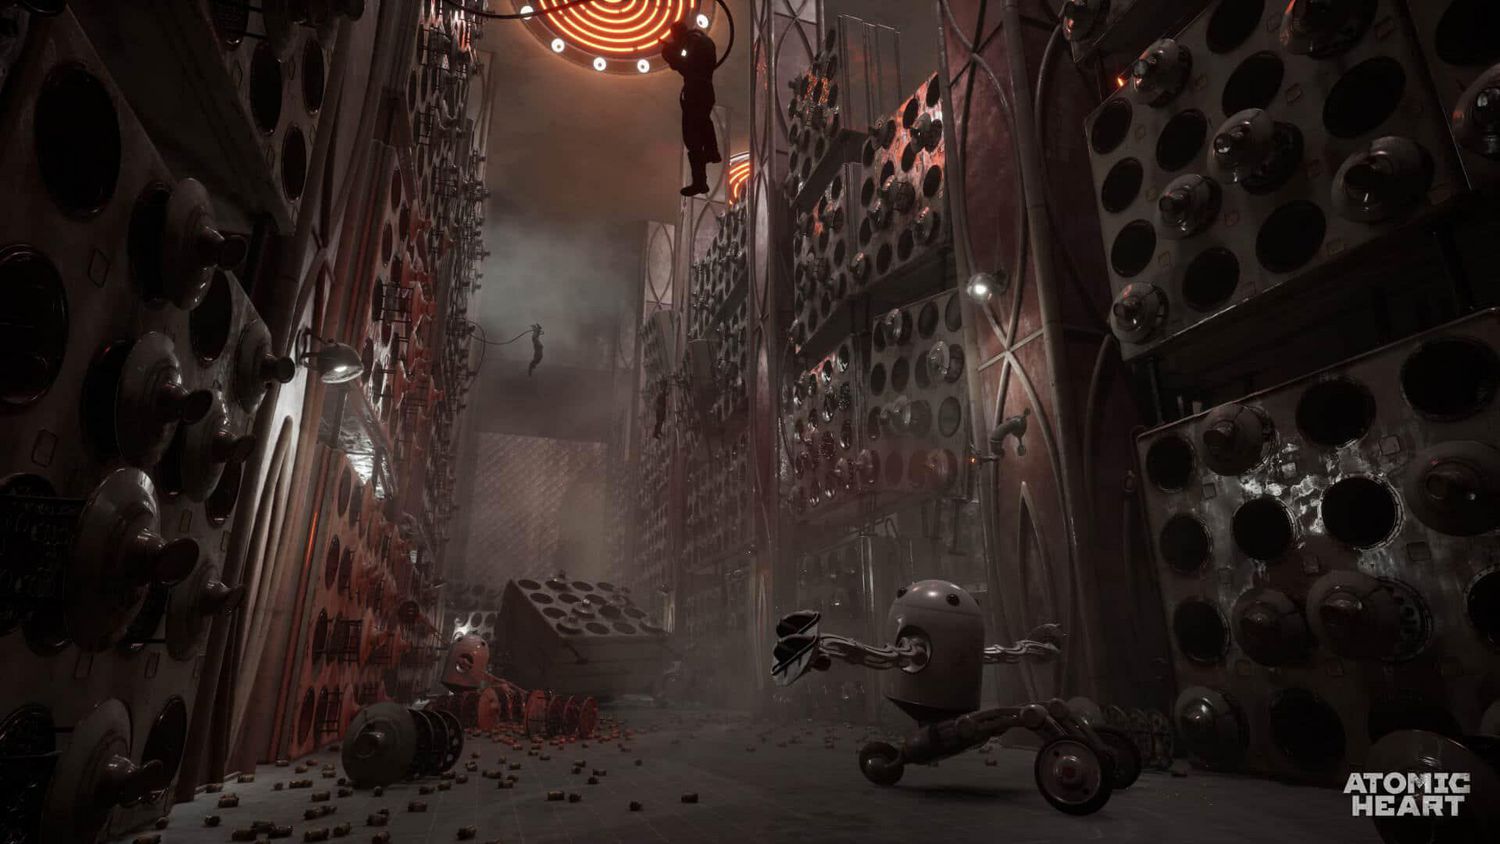 Atomic Heart Update 1.003.500 Fired Out This March 10